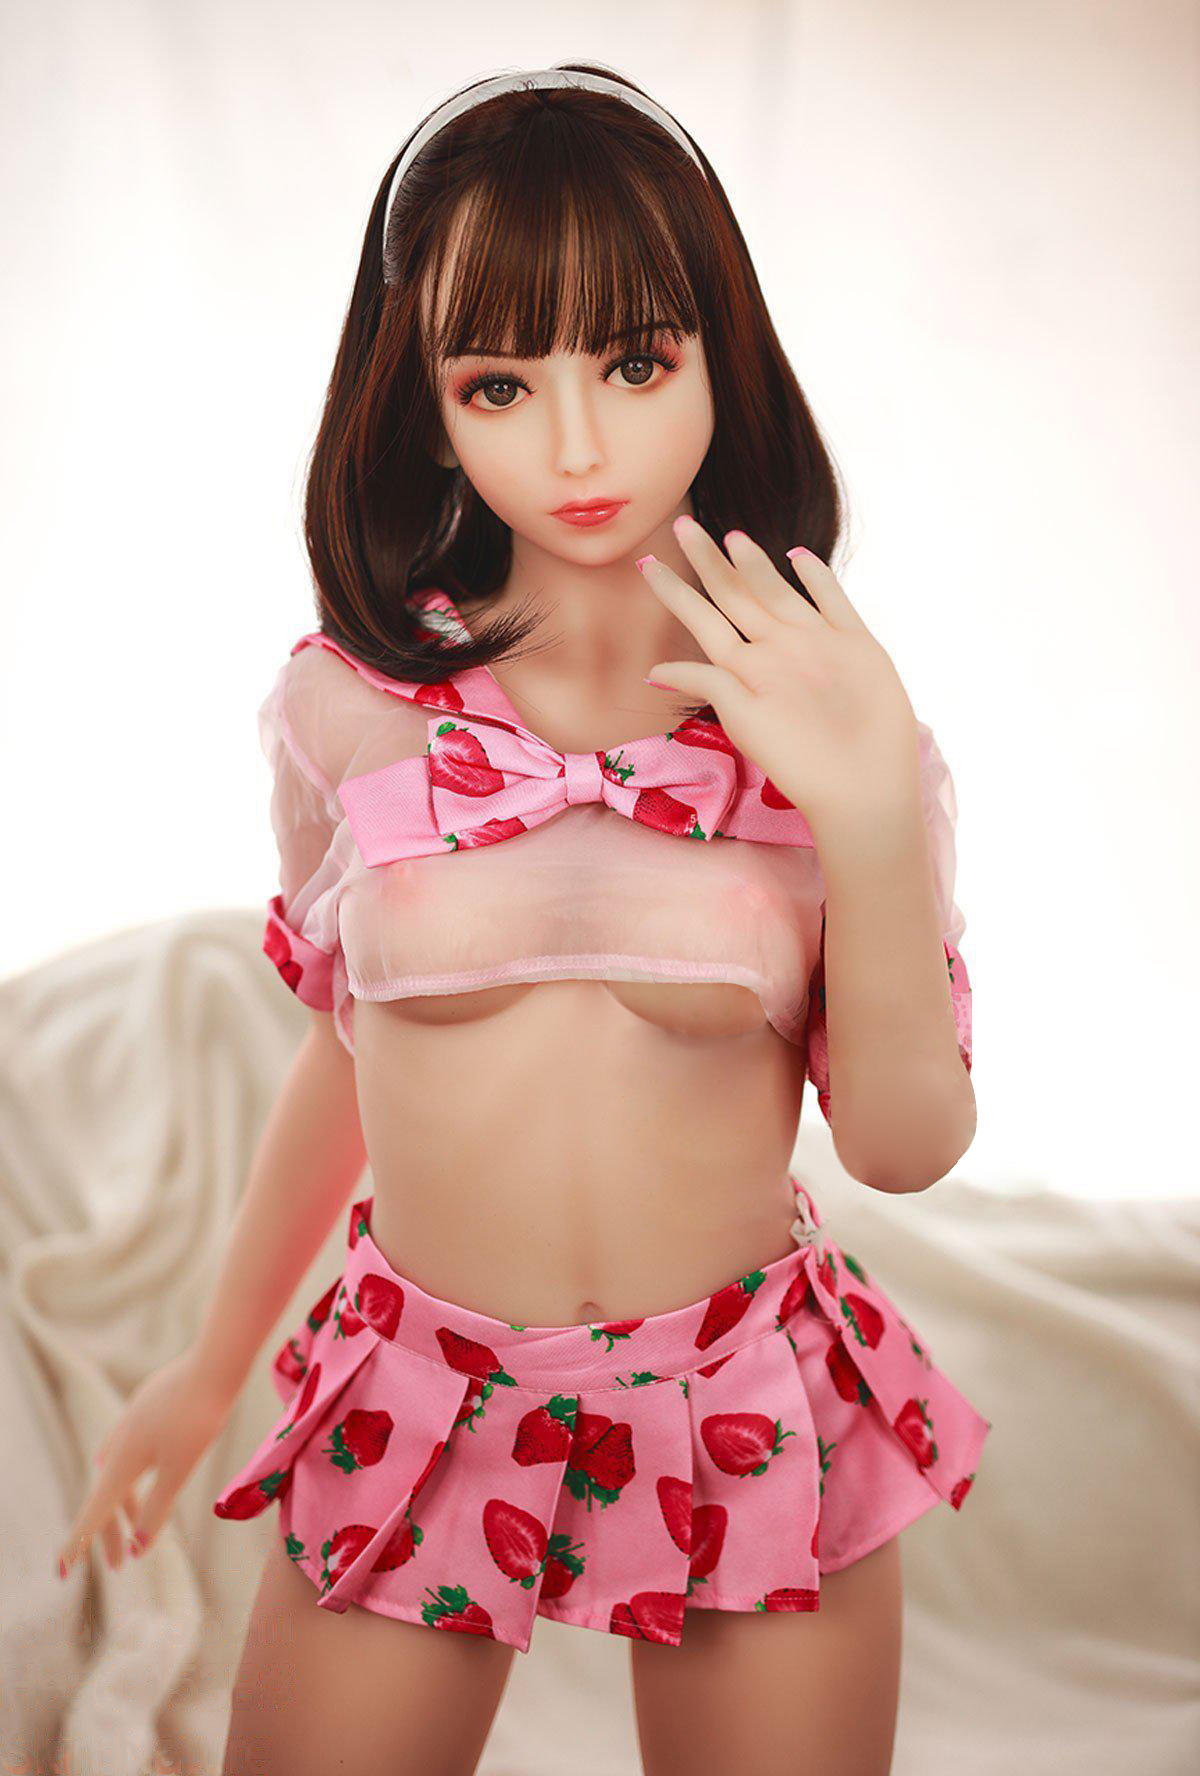 Lilly-Cute-Asian-Sex-Doll-6